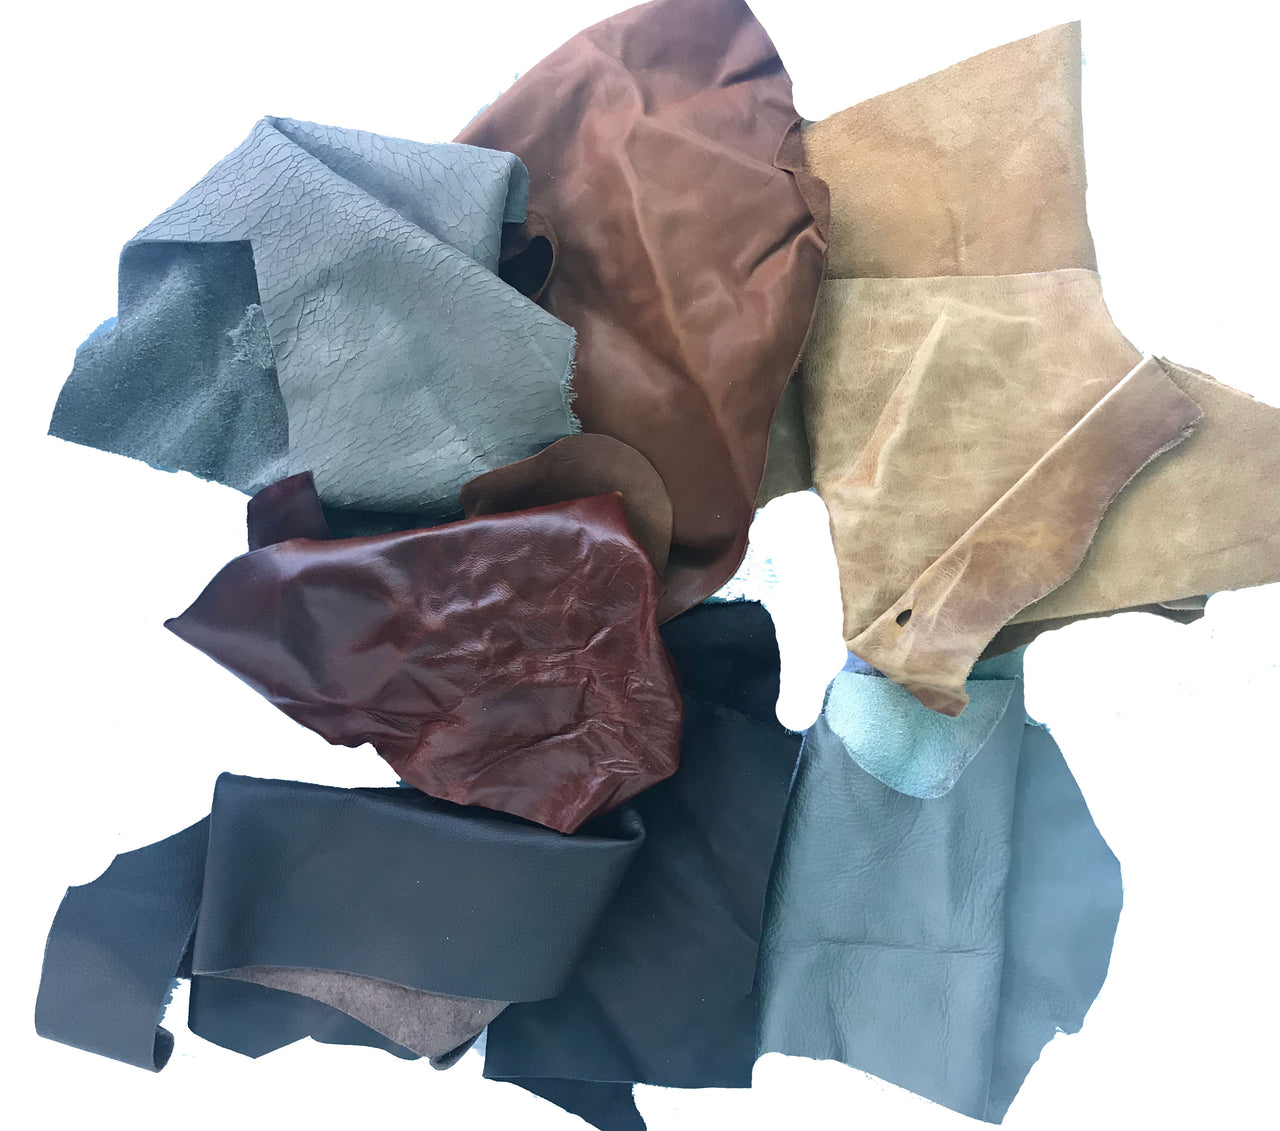 Assorted Leather Remnant Bag - Weaver Leather Supply